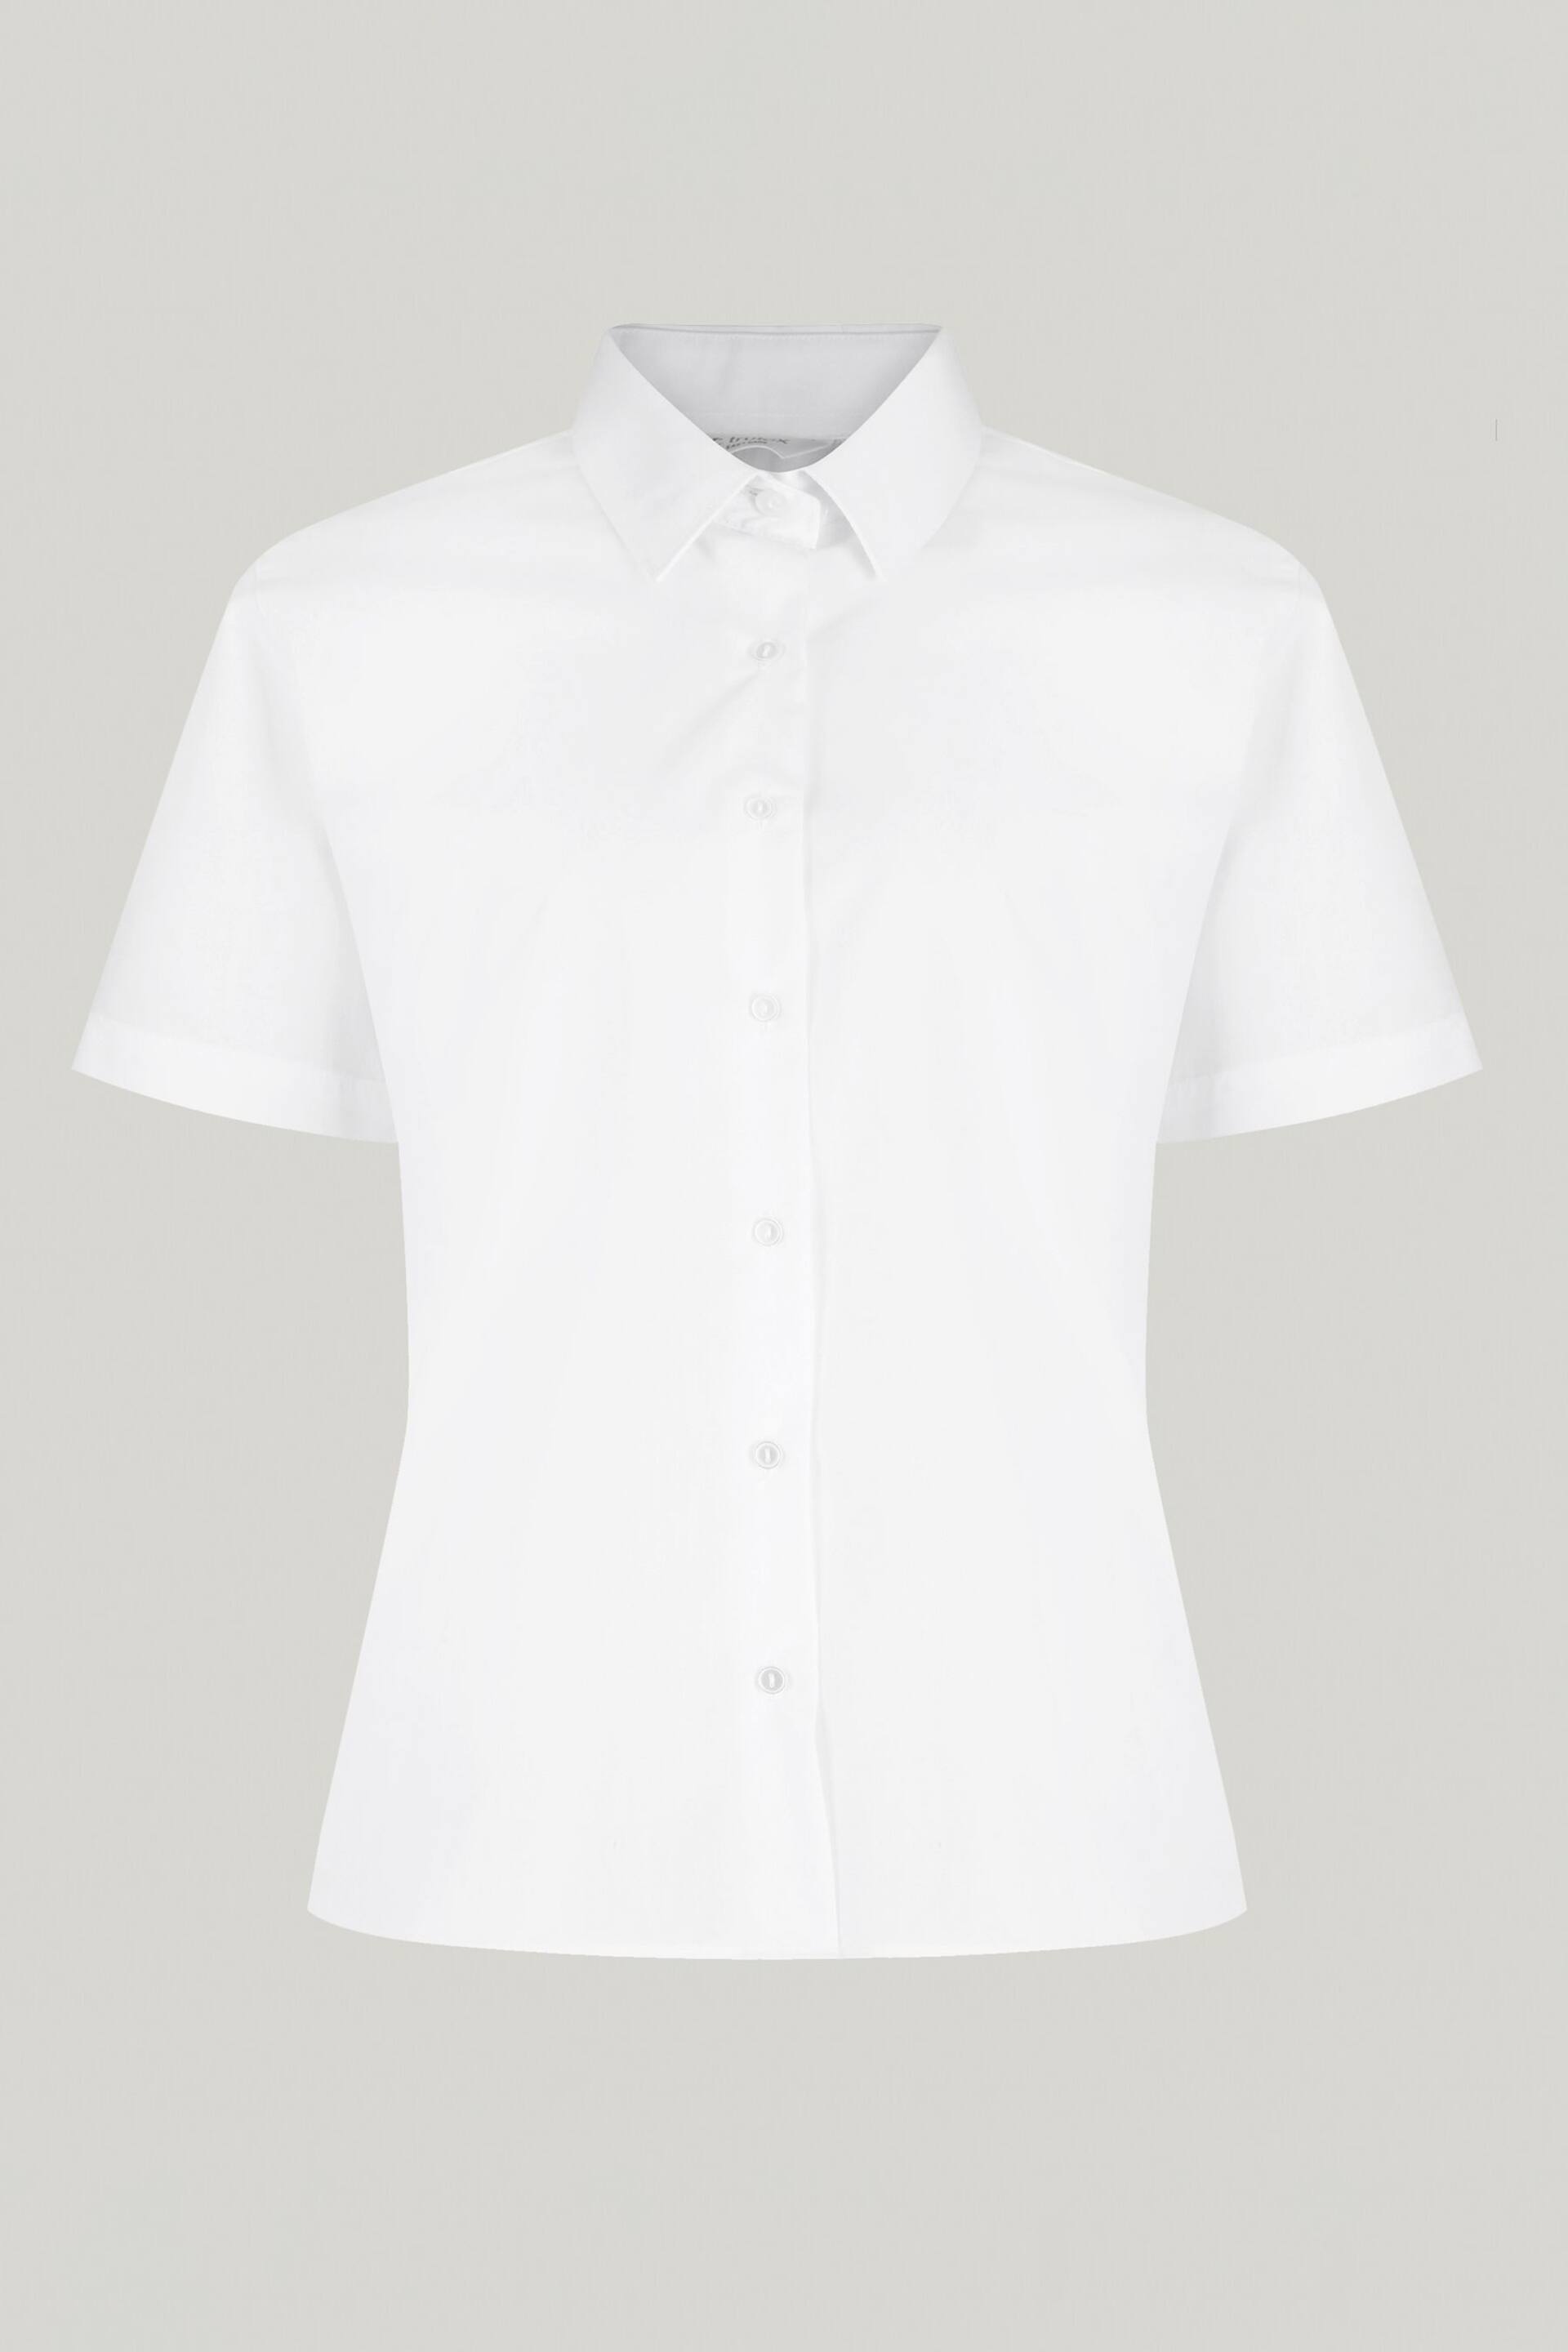 Trutex White Regular Fit Short Sleeve 2 Pack School Shirts - Image 6 of 7